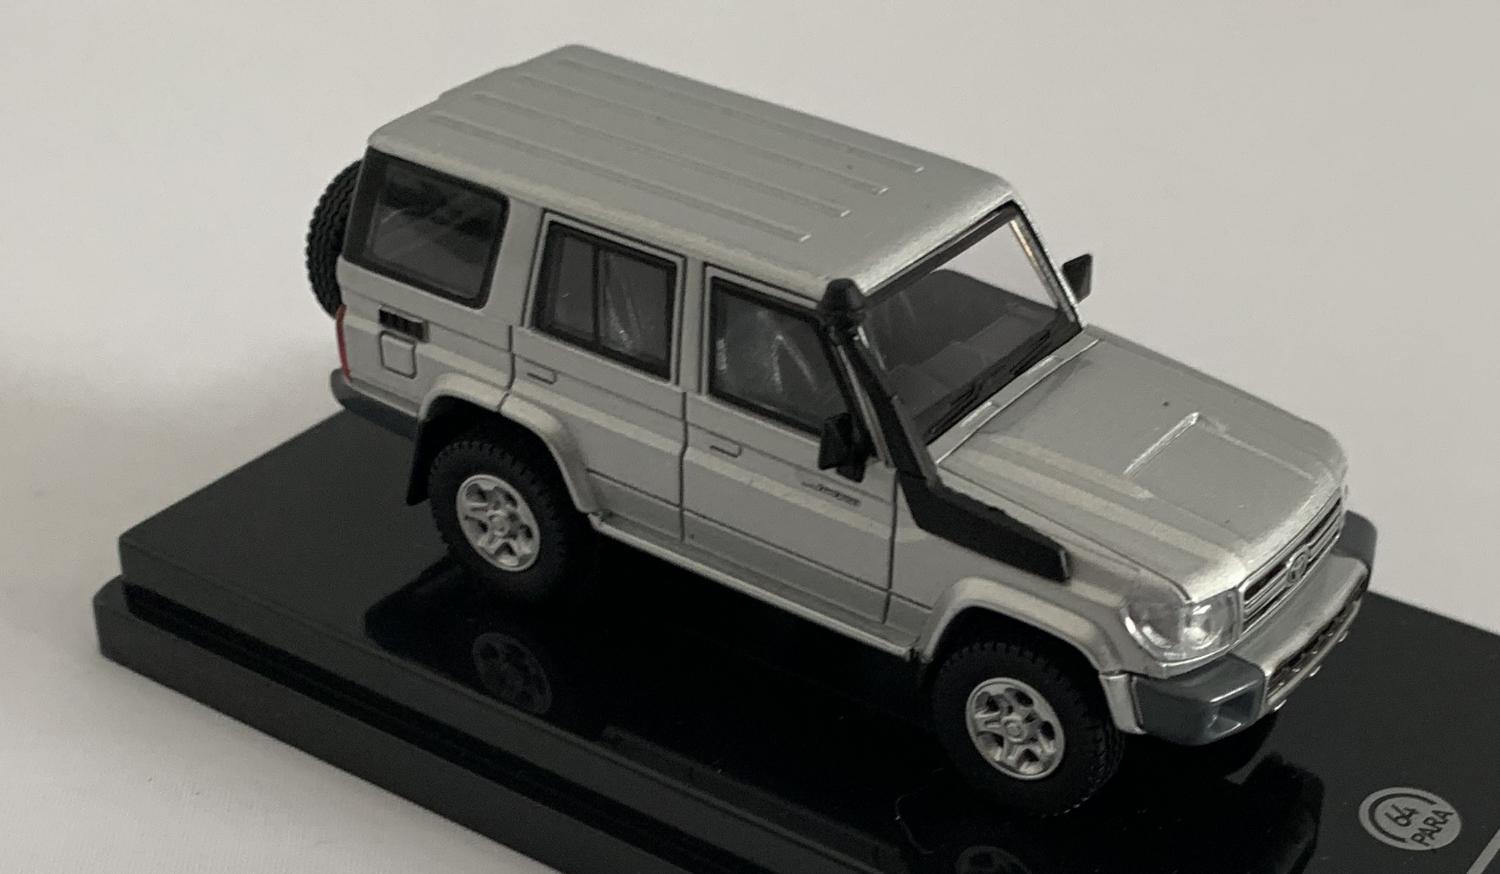 Toyota Land Cruiser in silver pearl 1:64 scale model from Paragon Models